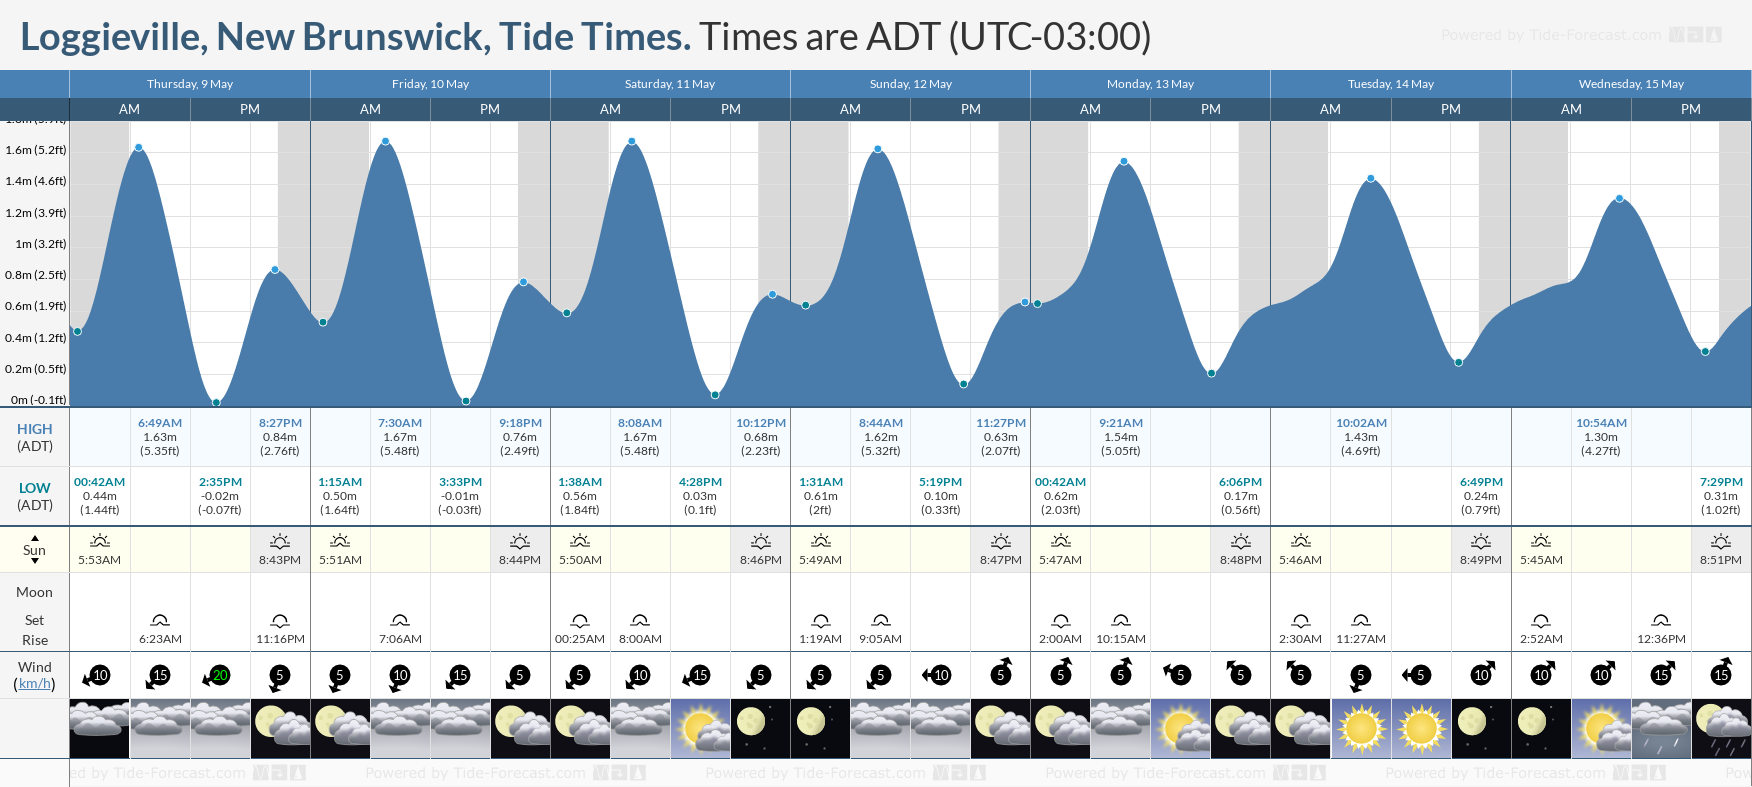 Loggieville, New Brunswick Tide Chart including high and low tide tide times for the next 7 days